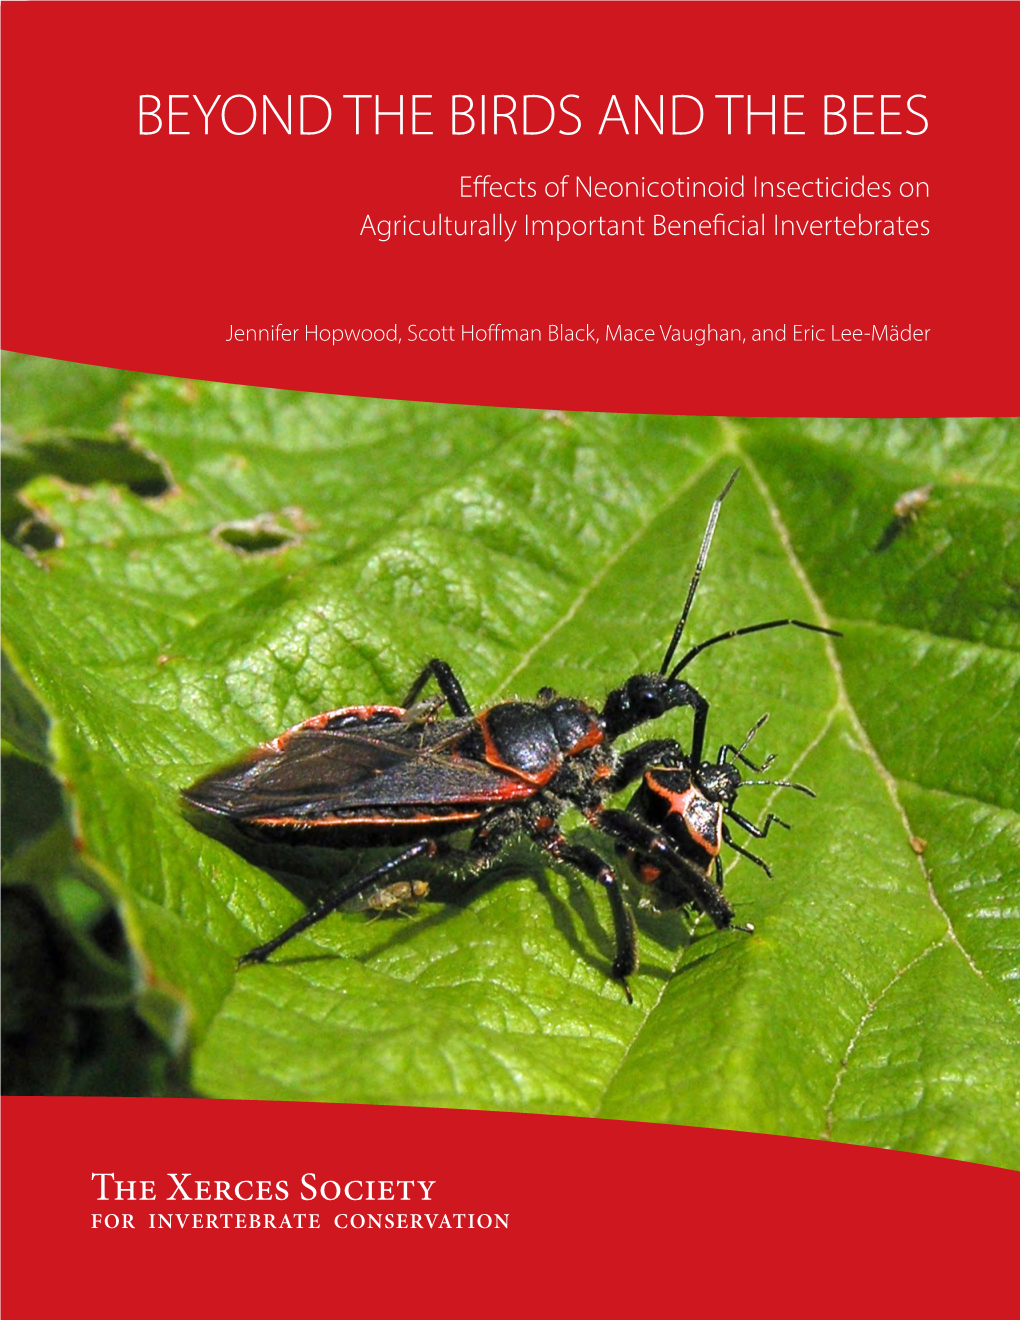 BEYOND the BIRDS and the BEES Effects of Neonicotinoid Insecticides on Agriculturally Important Beneficial Invertebrates